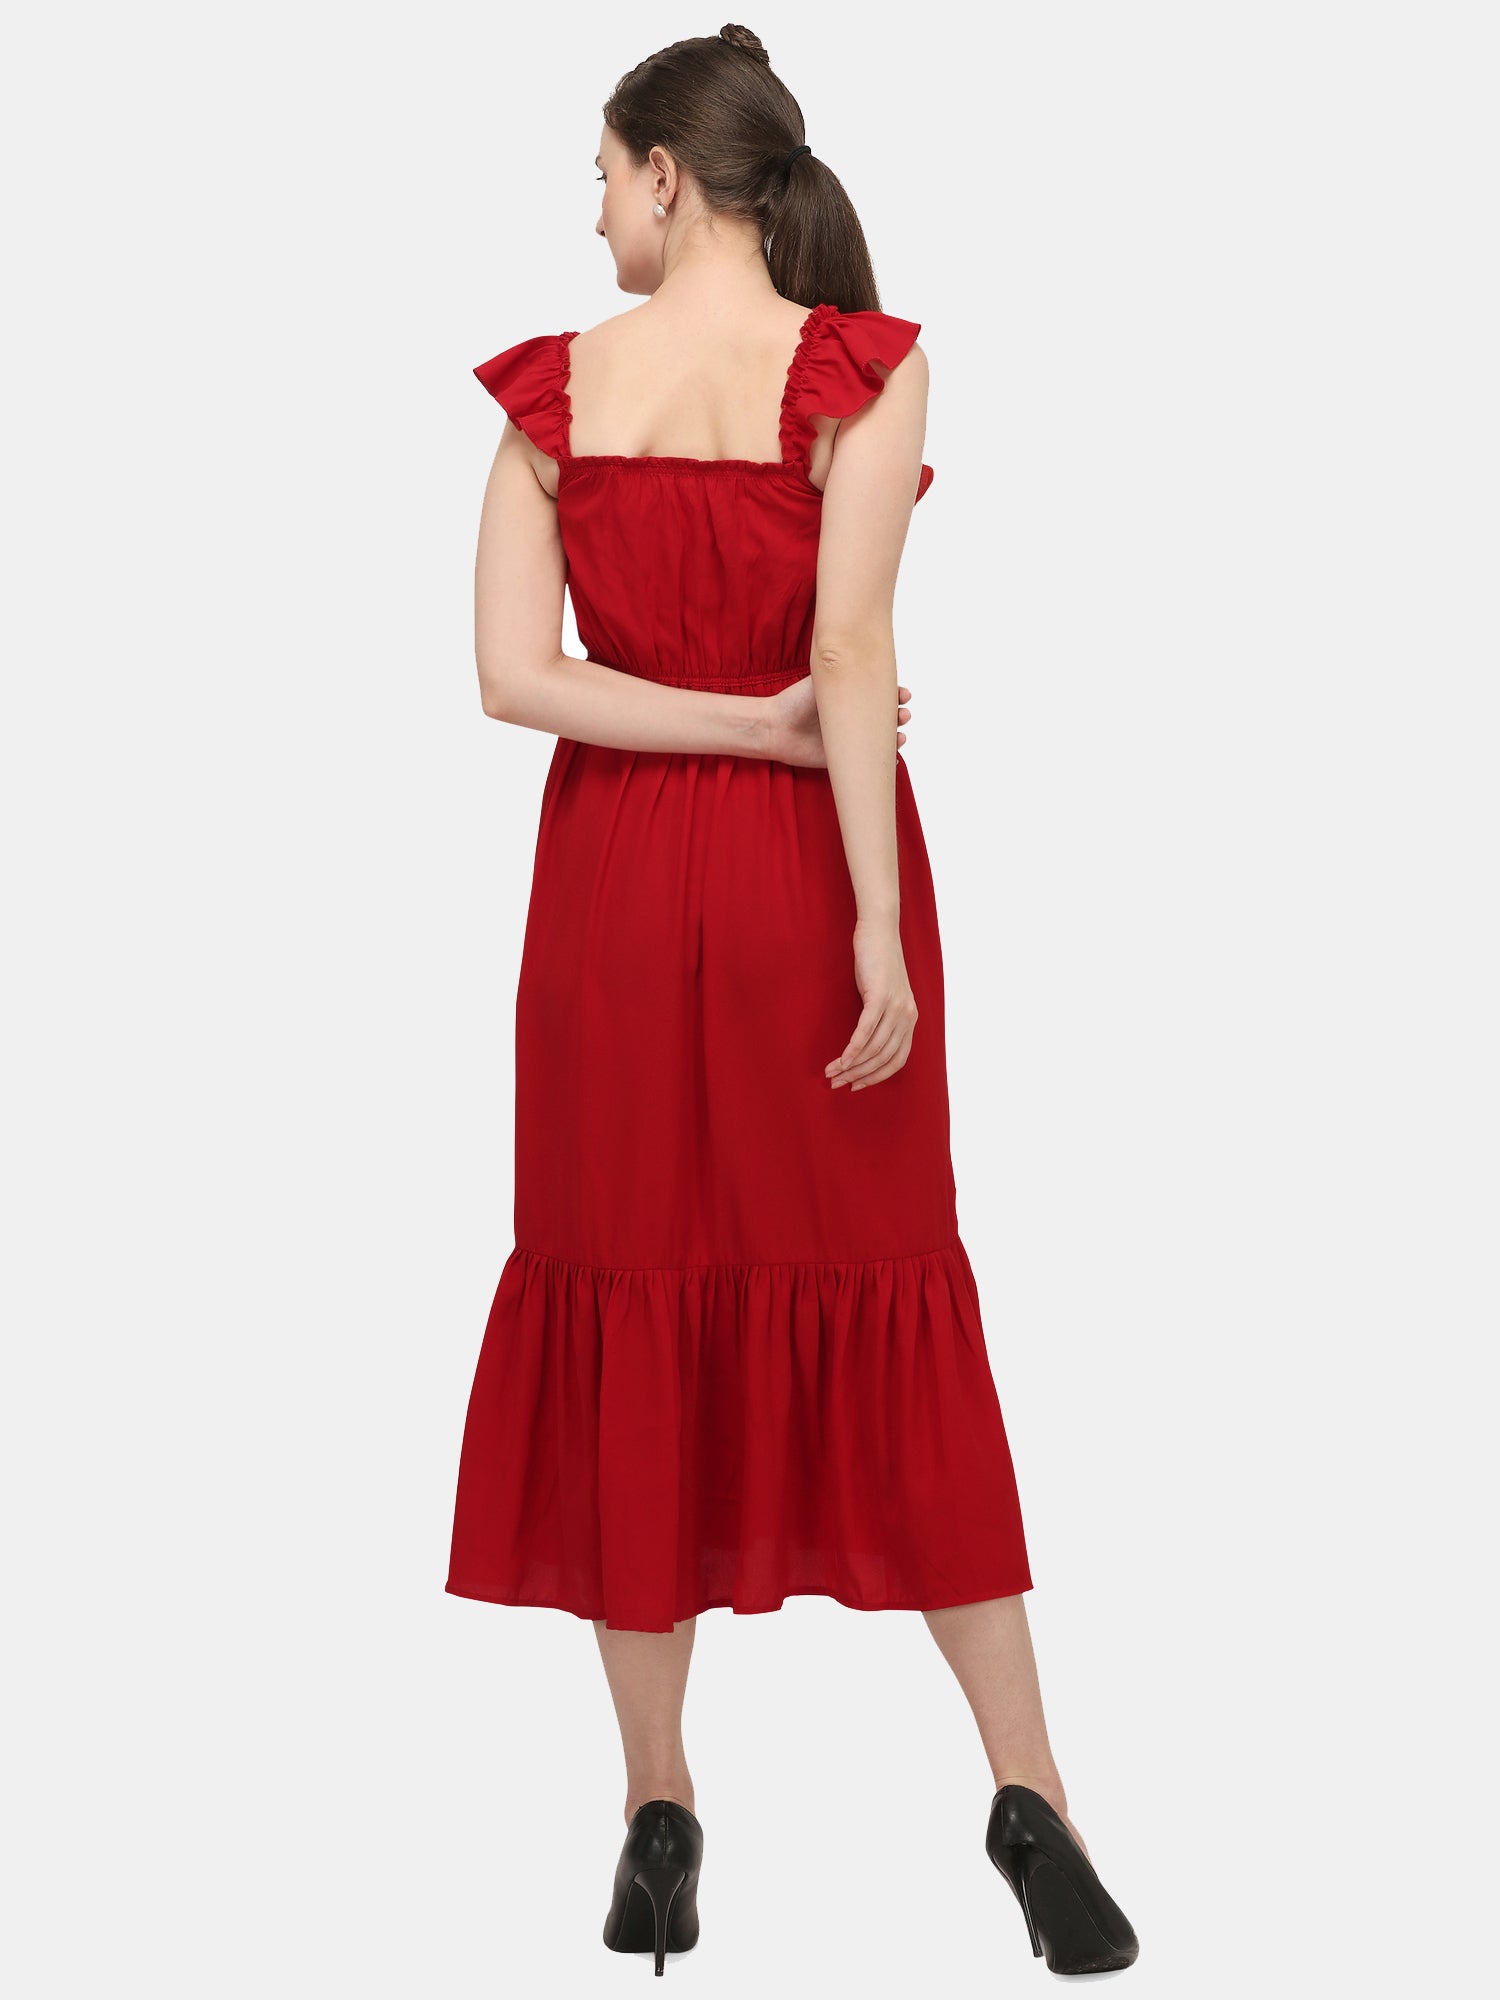 Women's Red Hot Long Ankle Length Dress - MESMORA FASHIONS